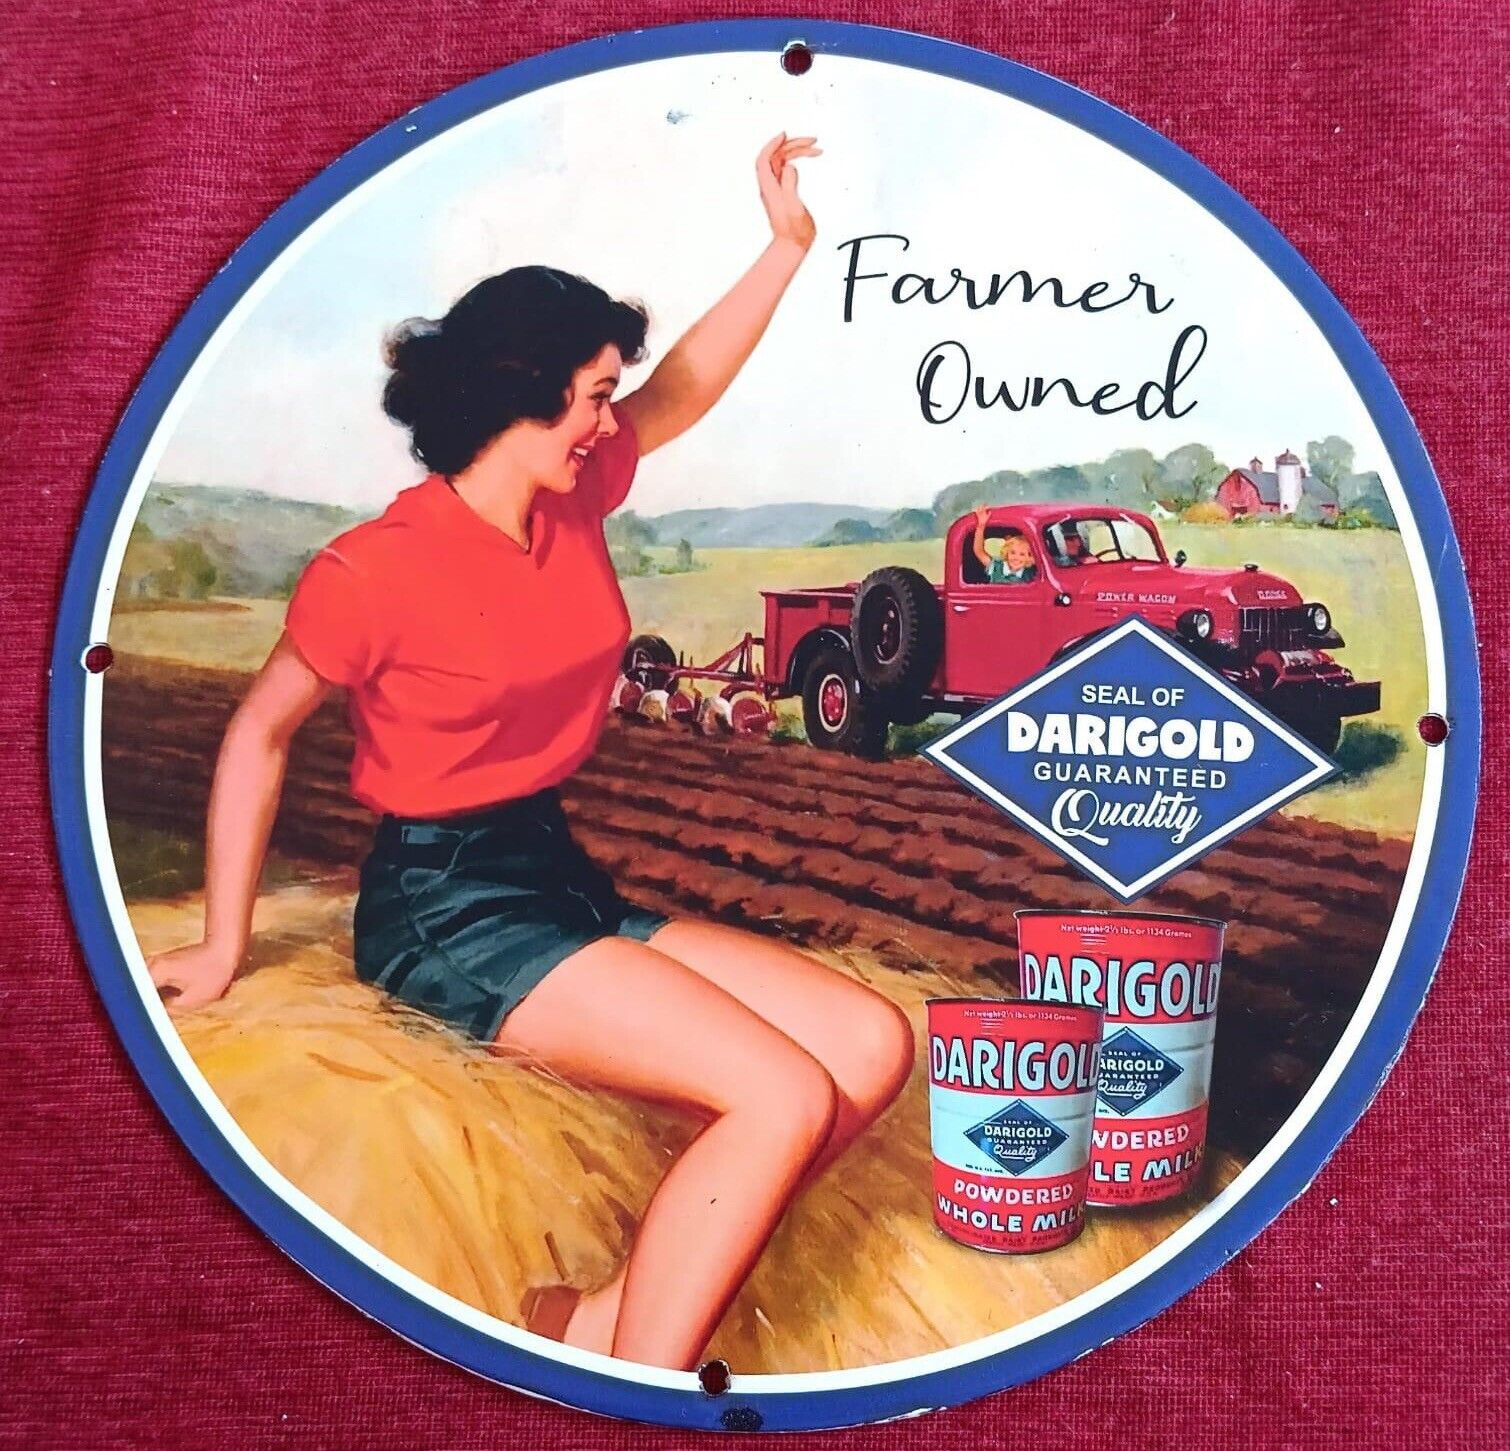 DAIRYGOLD POWER WHOLE MILK FARMERS OWNED PORCELAIN ENAMEL SIGN WITH GOOD QUALITY